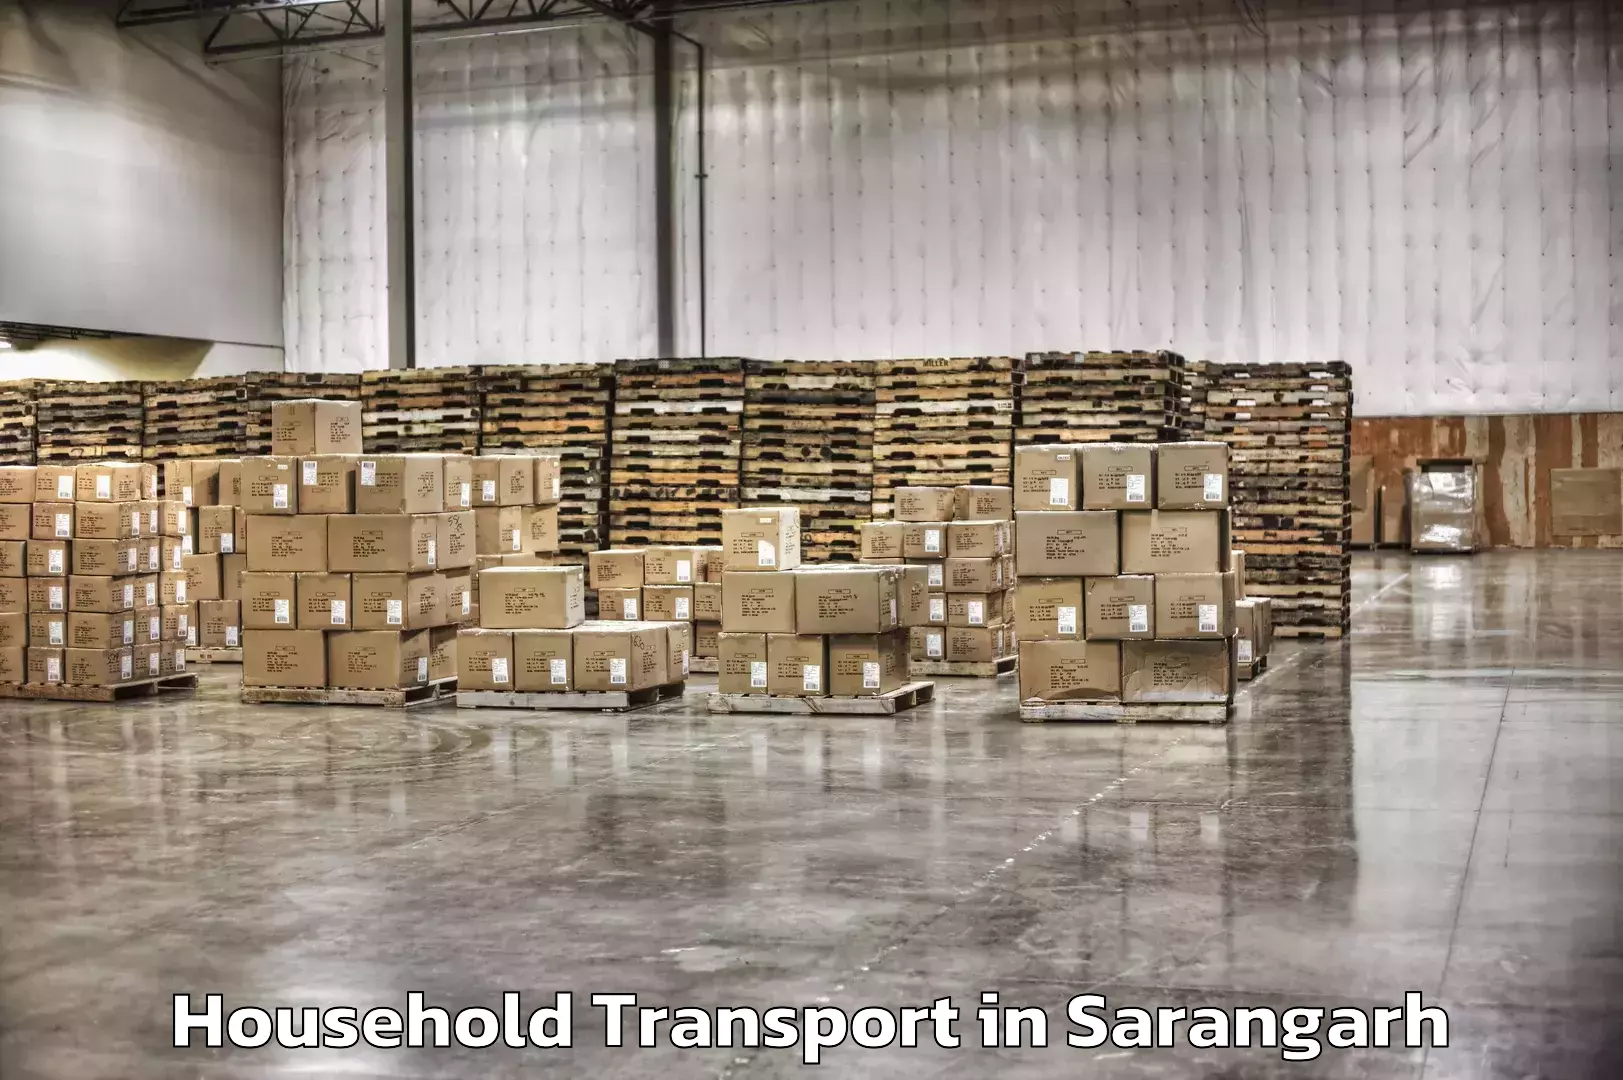 Furniture moving specialists in Sarangarh